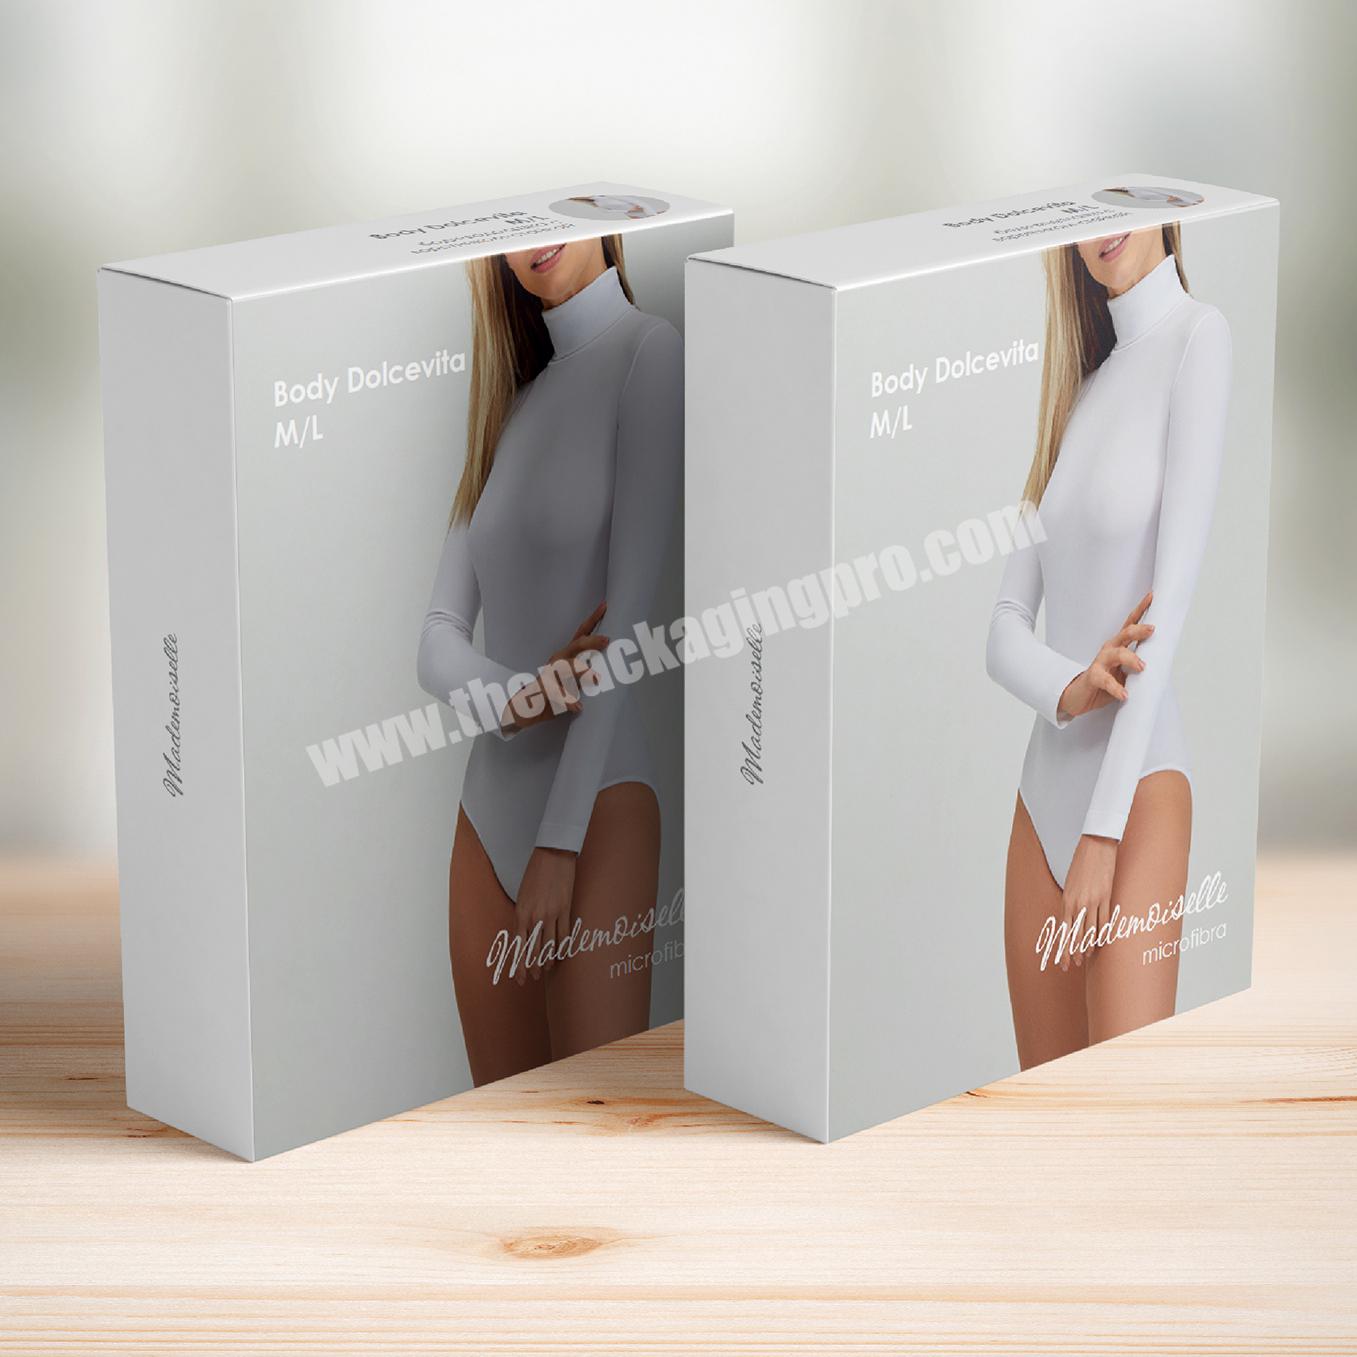 According to Your Own Design Silver Hot Foil Stamping Logo 100% Recycle Ivory Board Women Cotton Underwear Paper Package Design